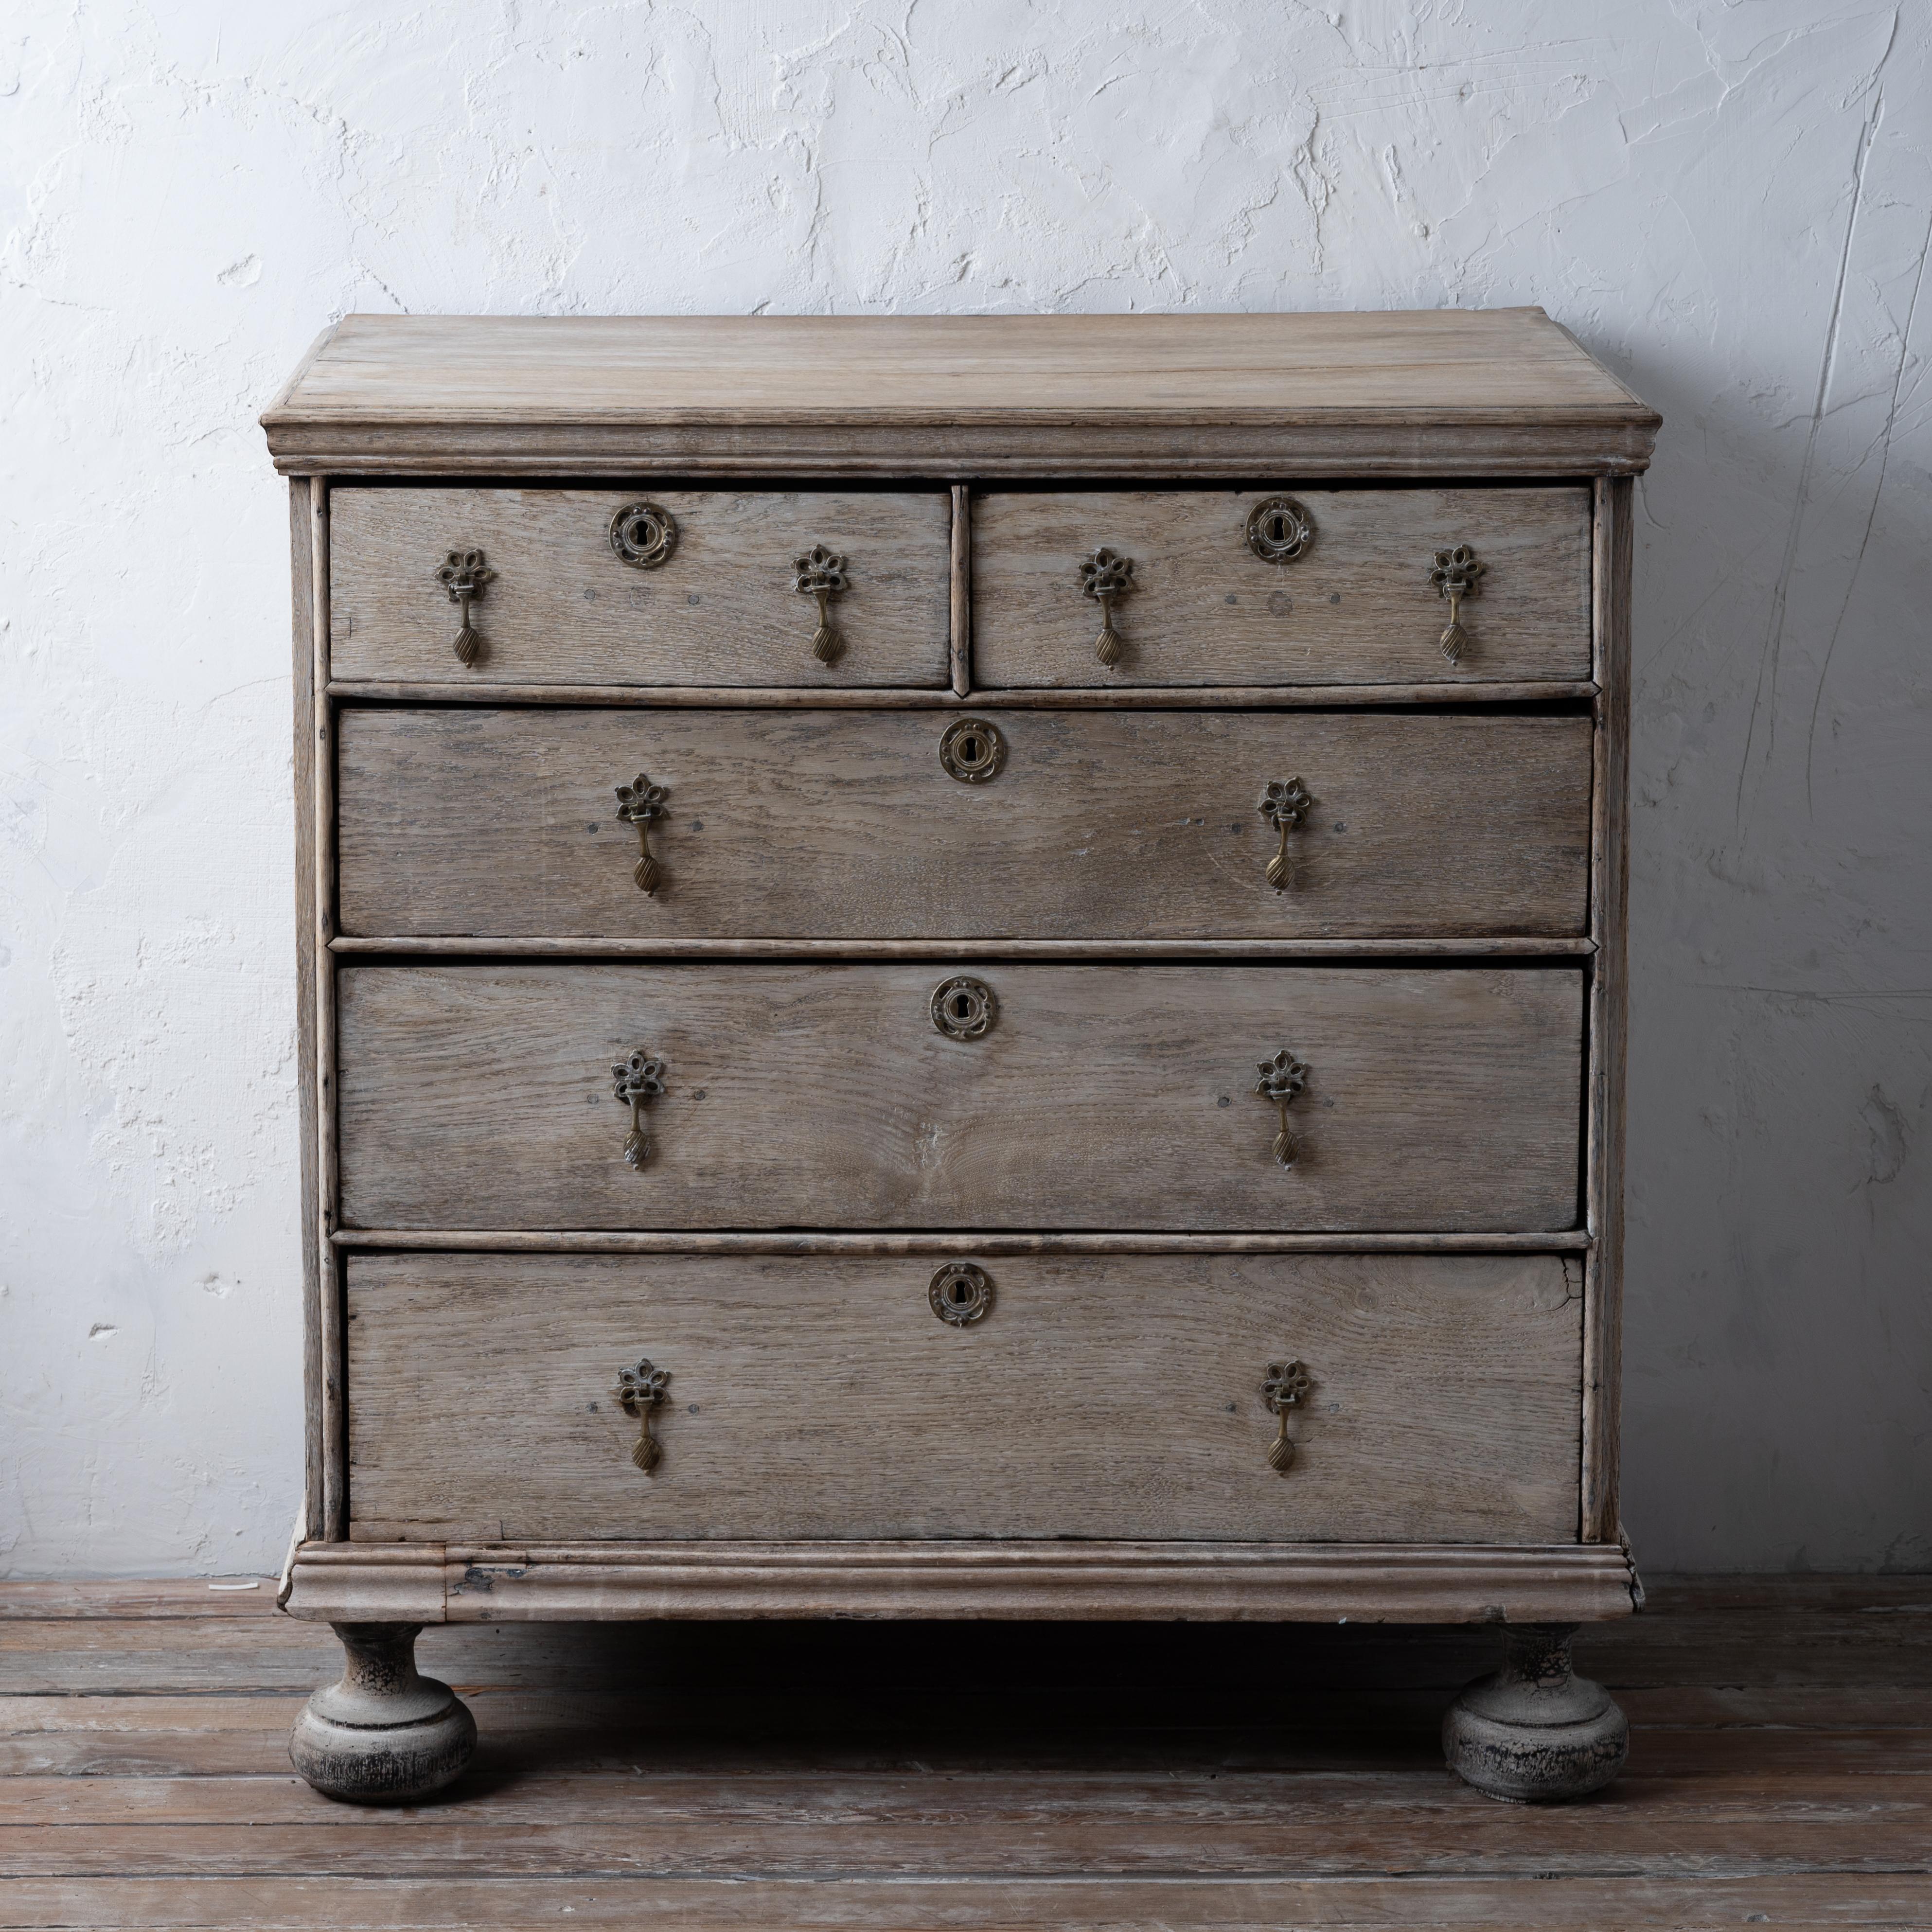 Bleached English Oak Chest, 18th Century 2